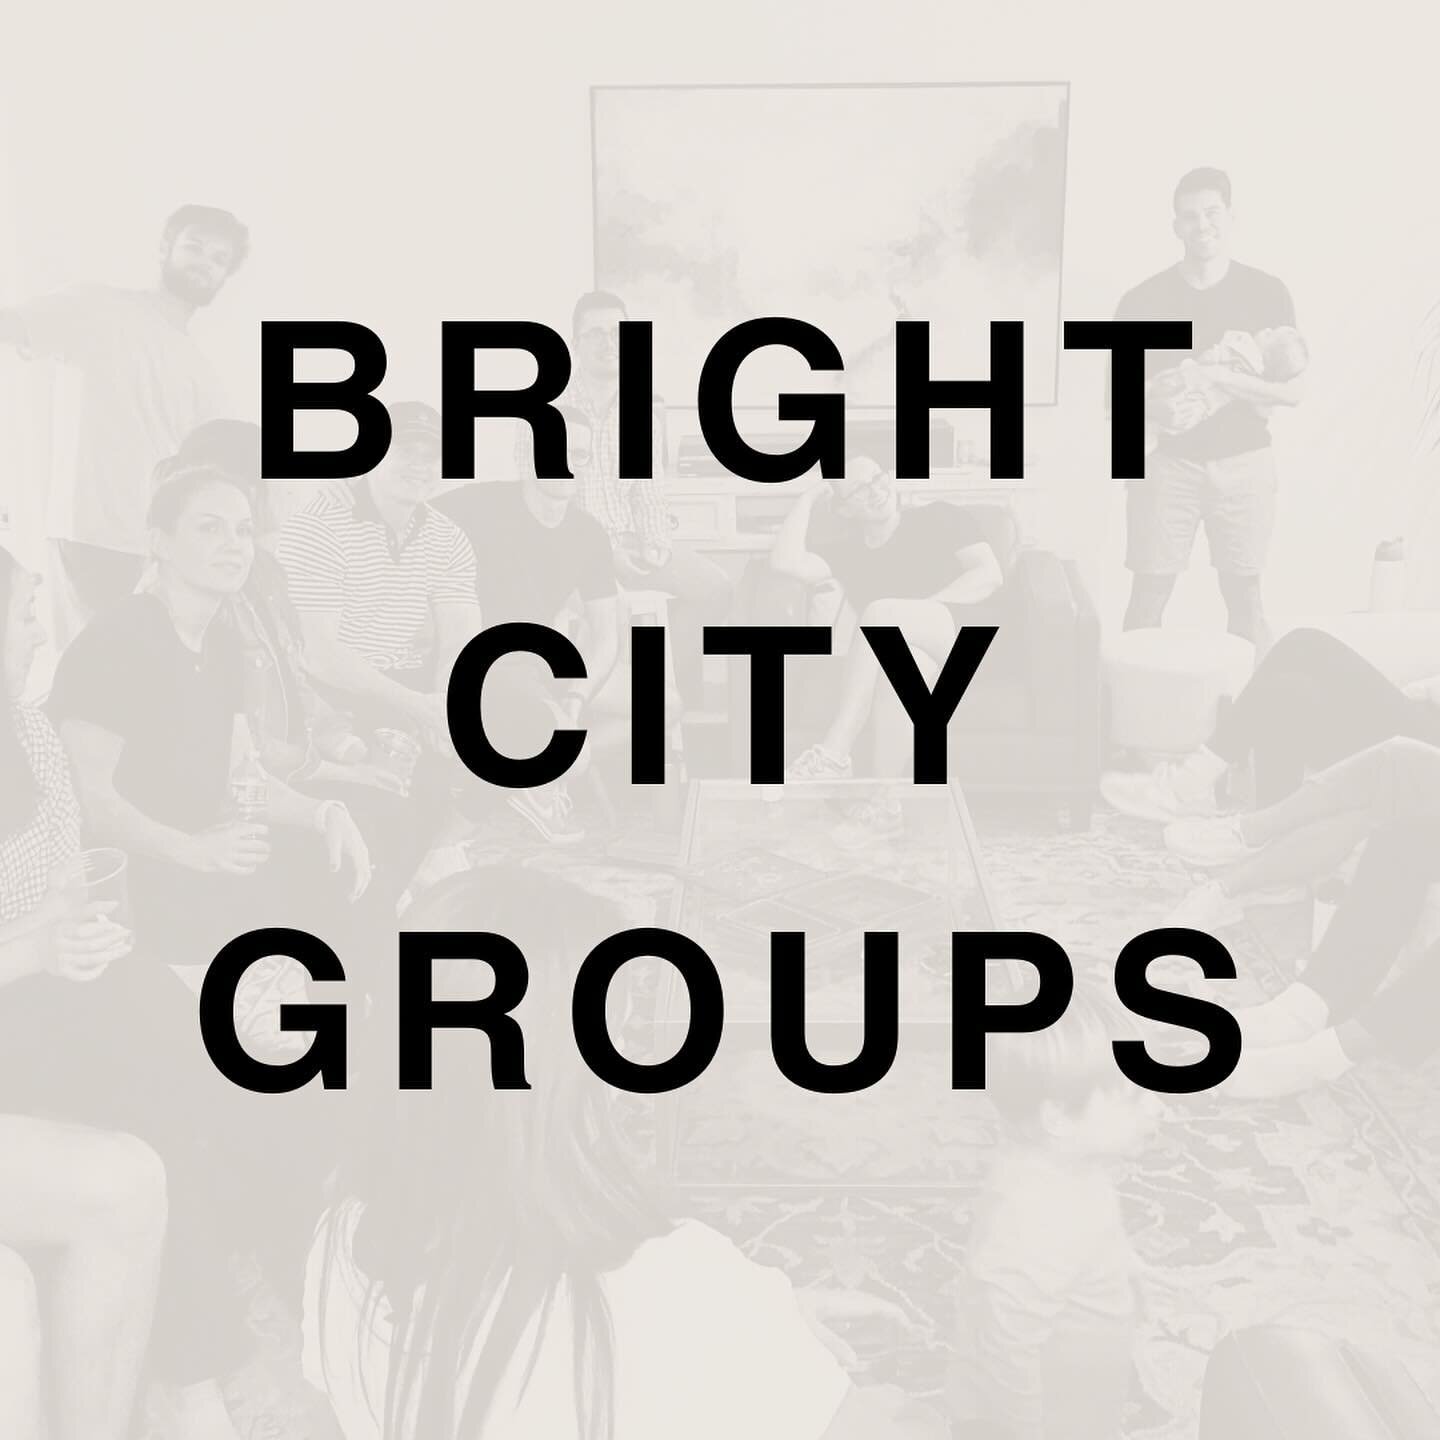 Bright City Groups are now up on the website!! We&rsquo;re so excited to grow together this semester and grateful for our leaders committing to building community through groups. If you&rsquo;re looking for friends, want to grow spiritually and get p